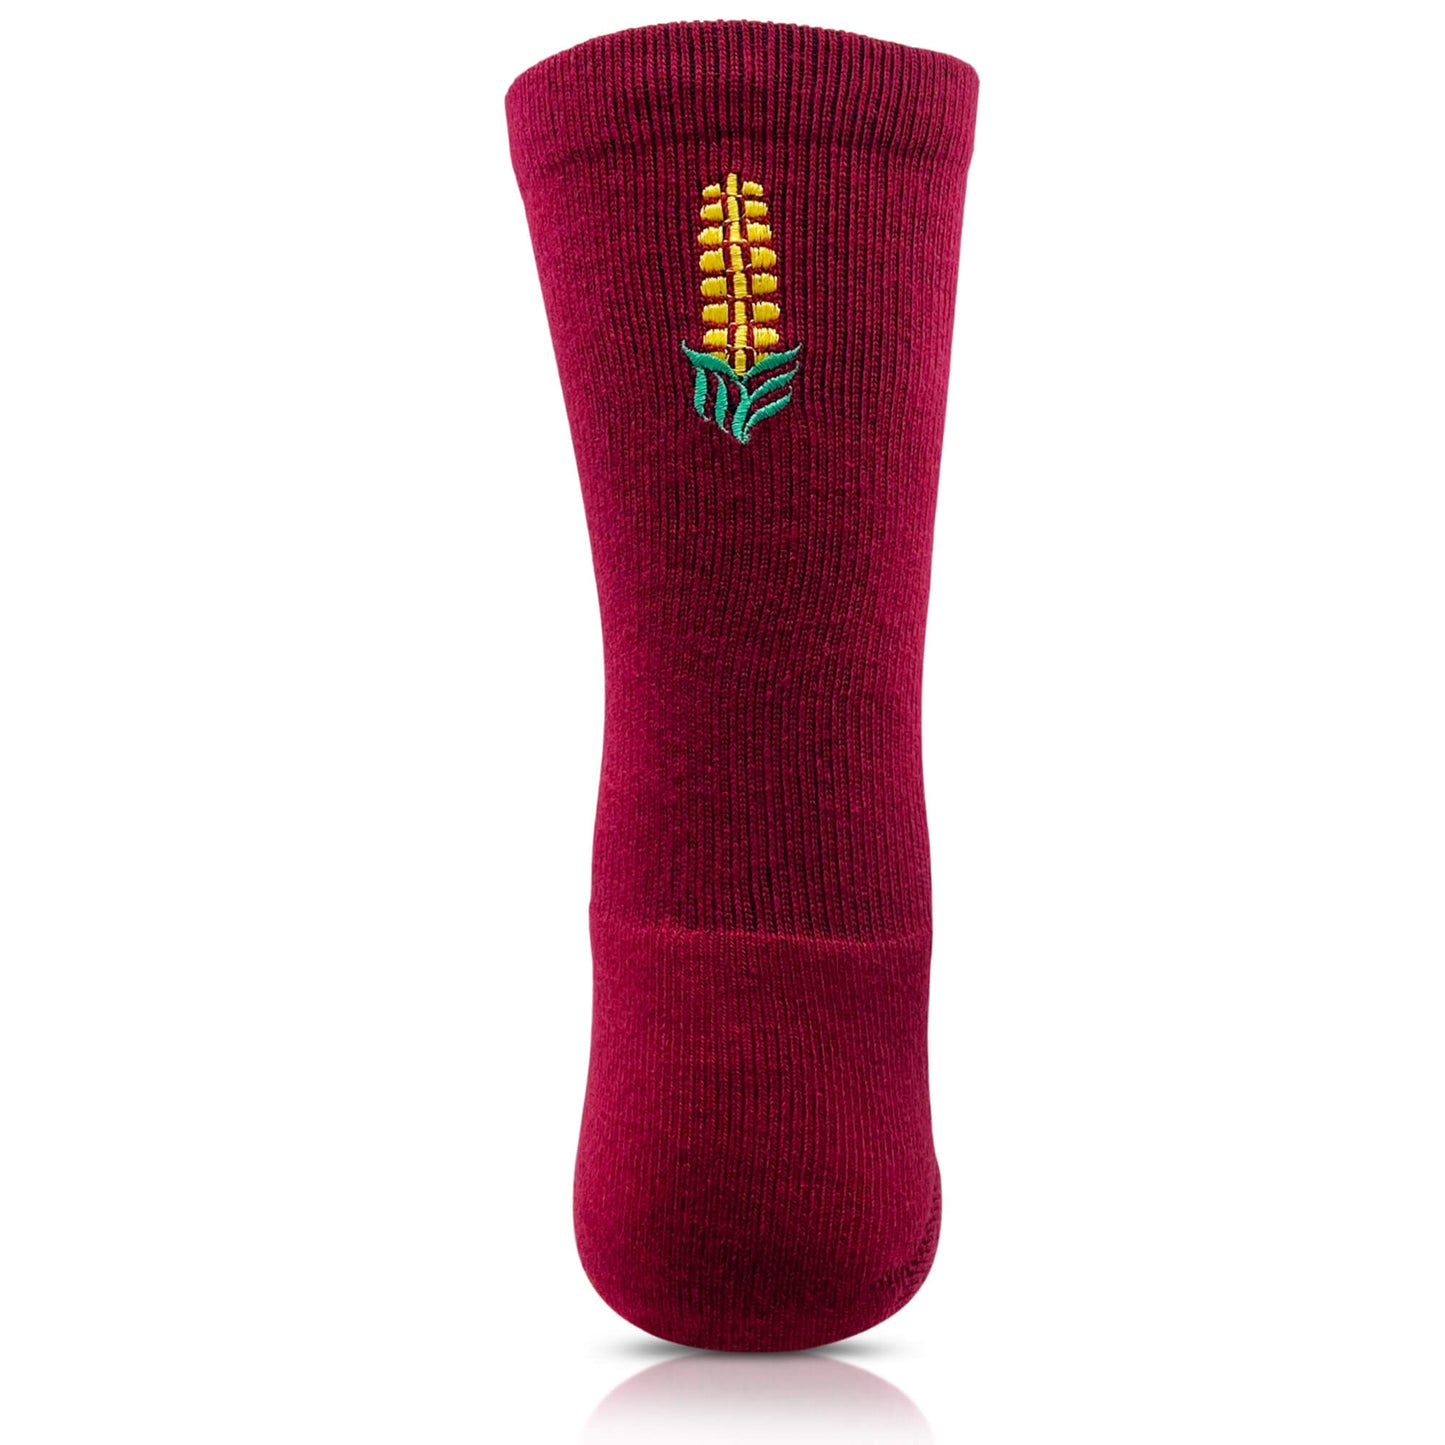 Modern Envy comfy Corn logo crew sock Maroon with Gold back view